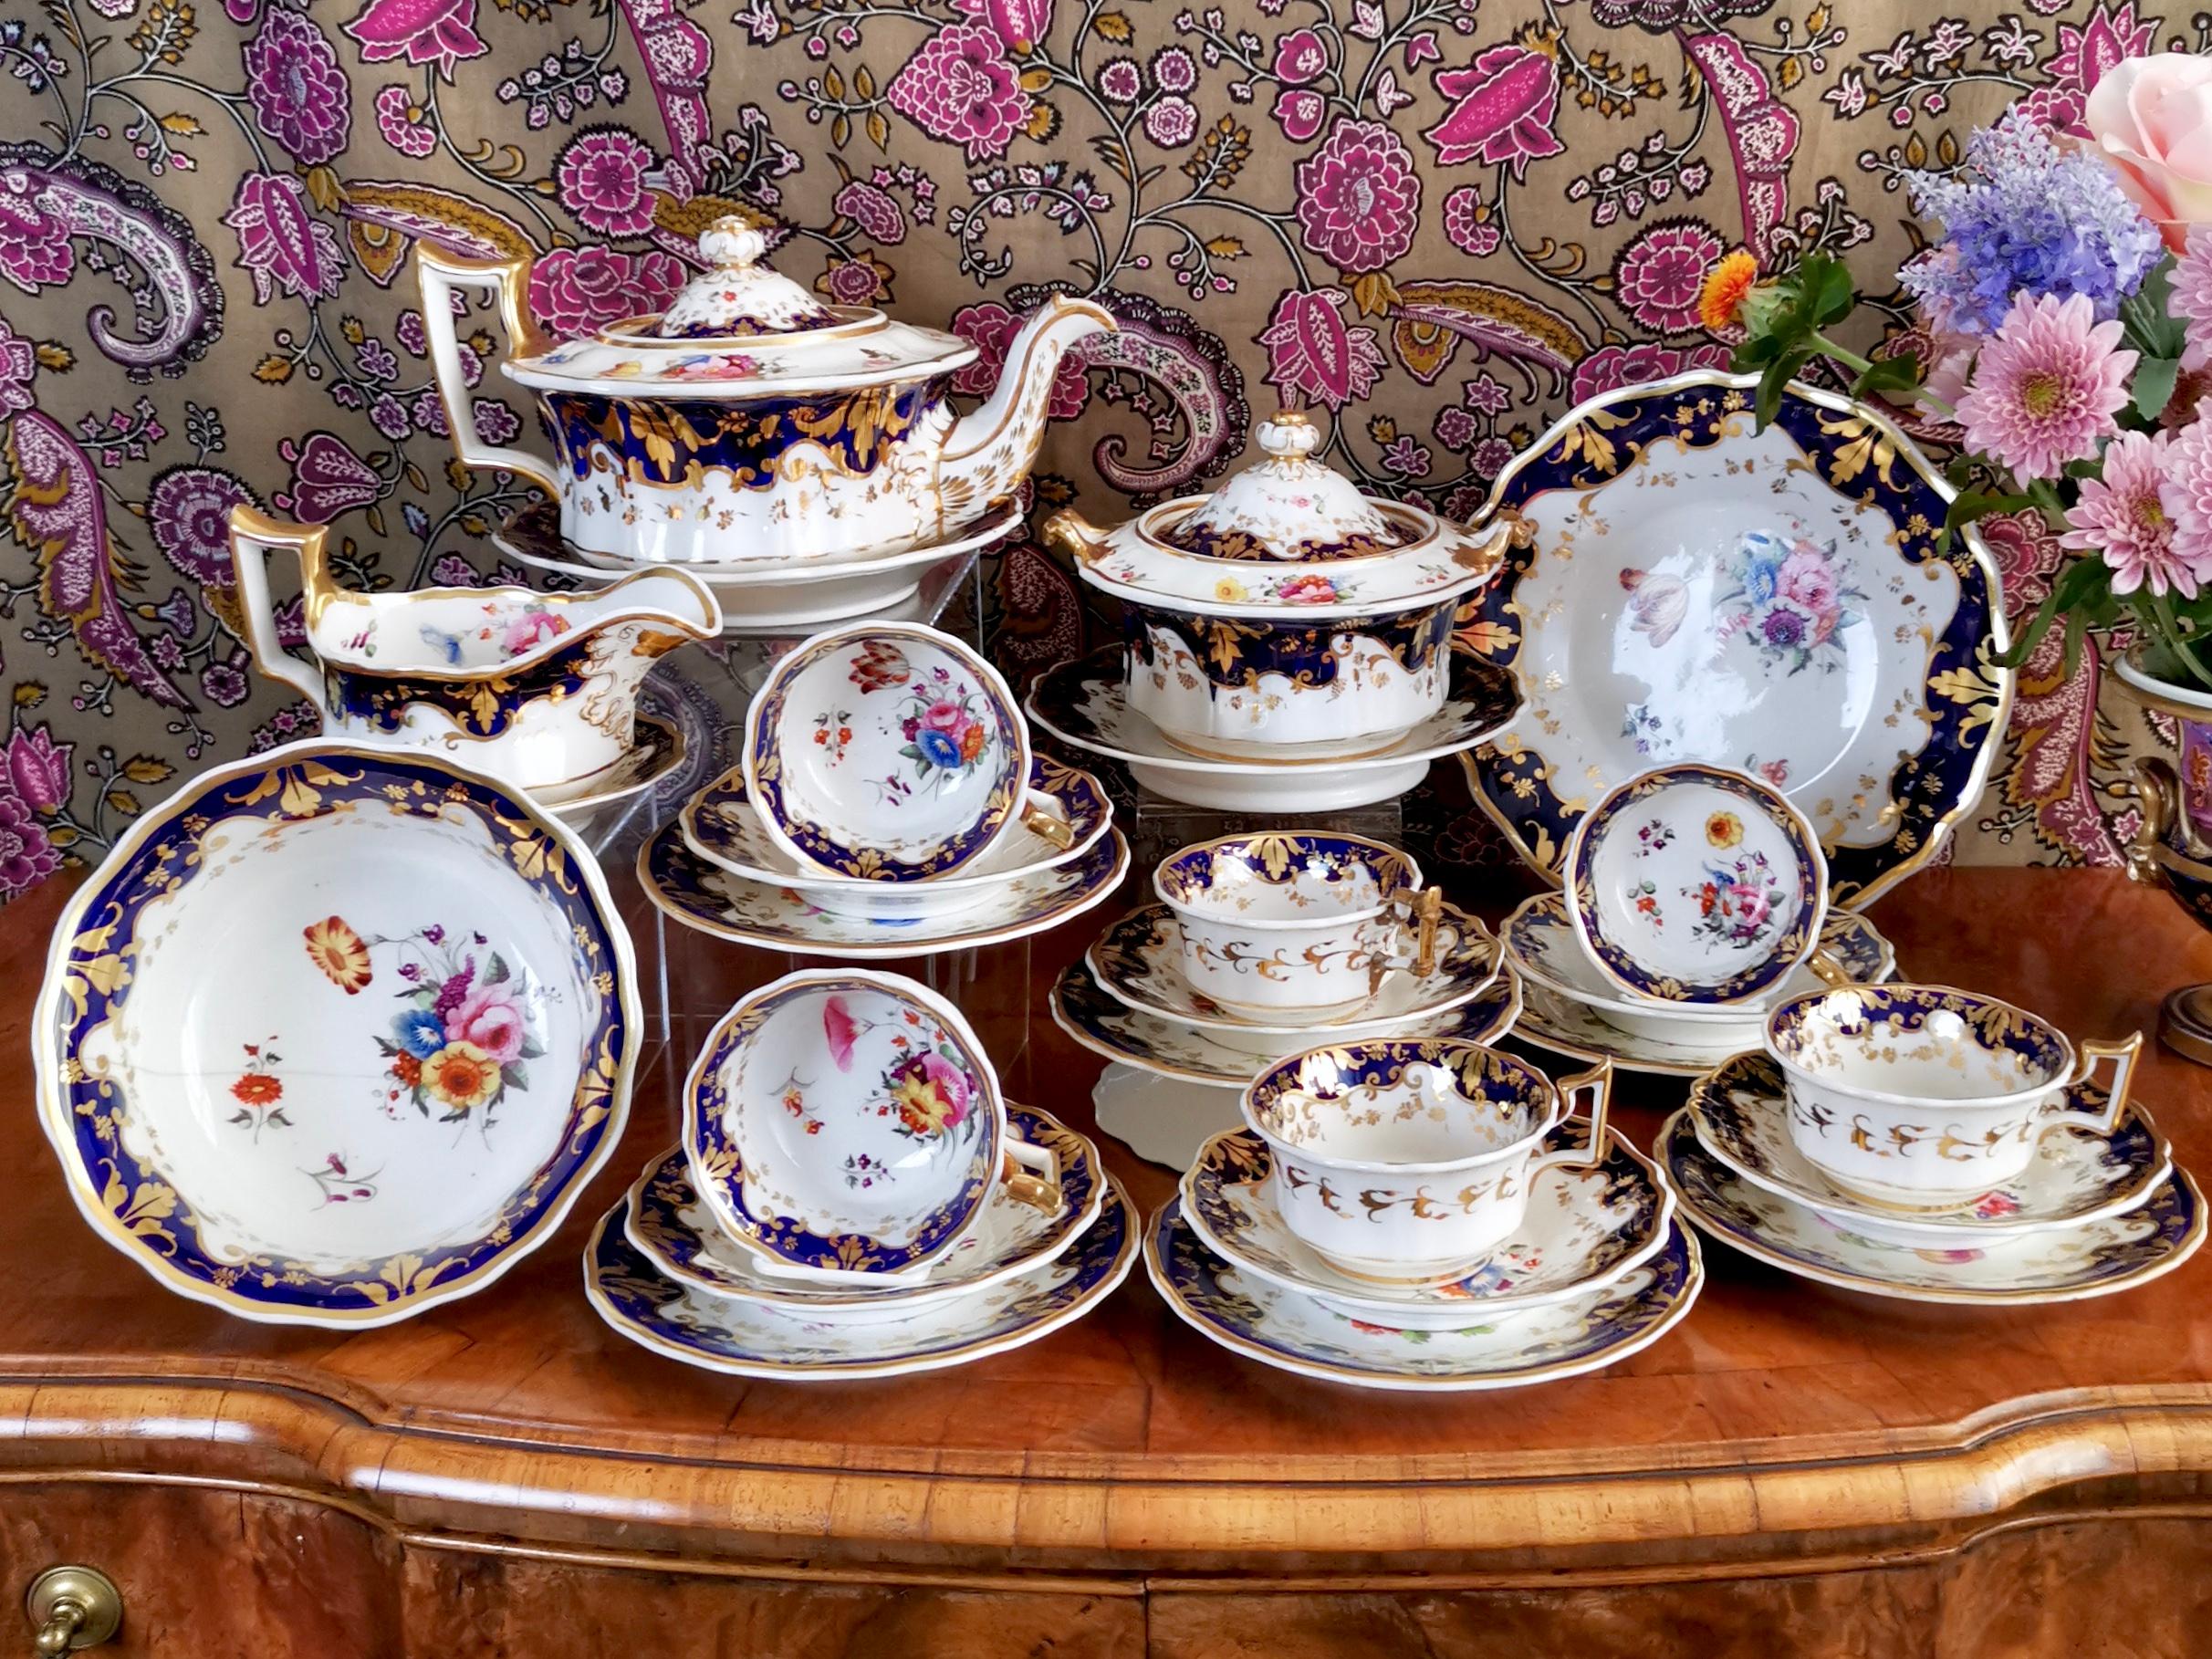 This is a stunning Ridgway porcelain tea service made between 1820 and 1825, which is known as the Regency period. It is decorated with a cobalt blue ground, beautiful hand painted flowers and gilt. The service consists of a teapot and stand, a